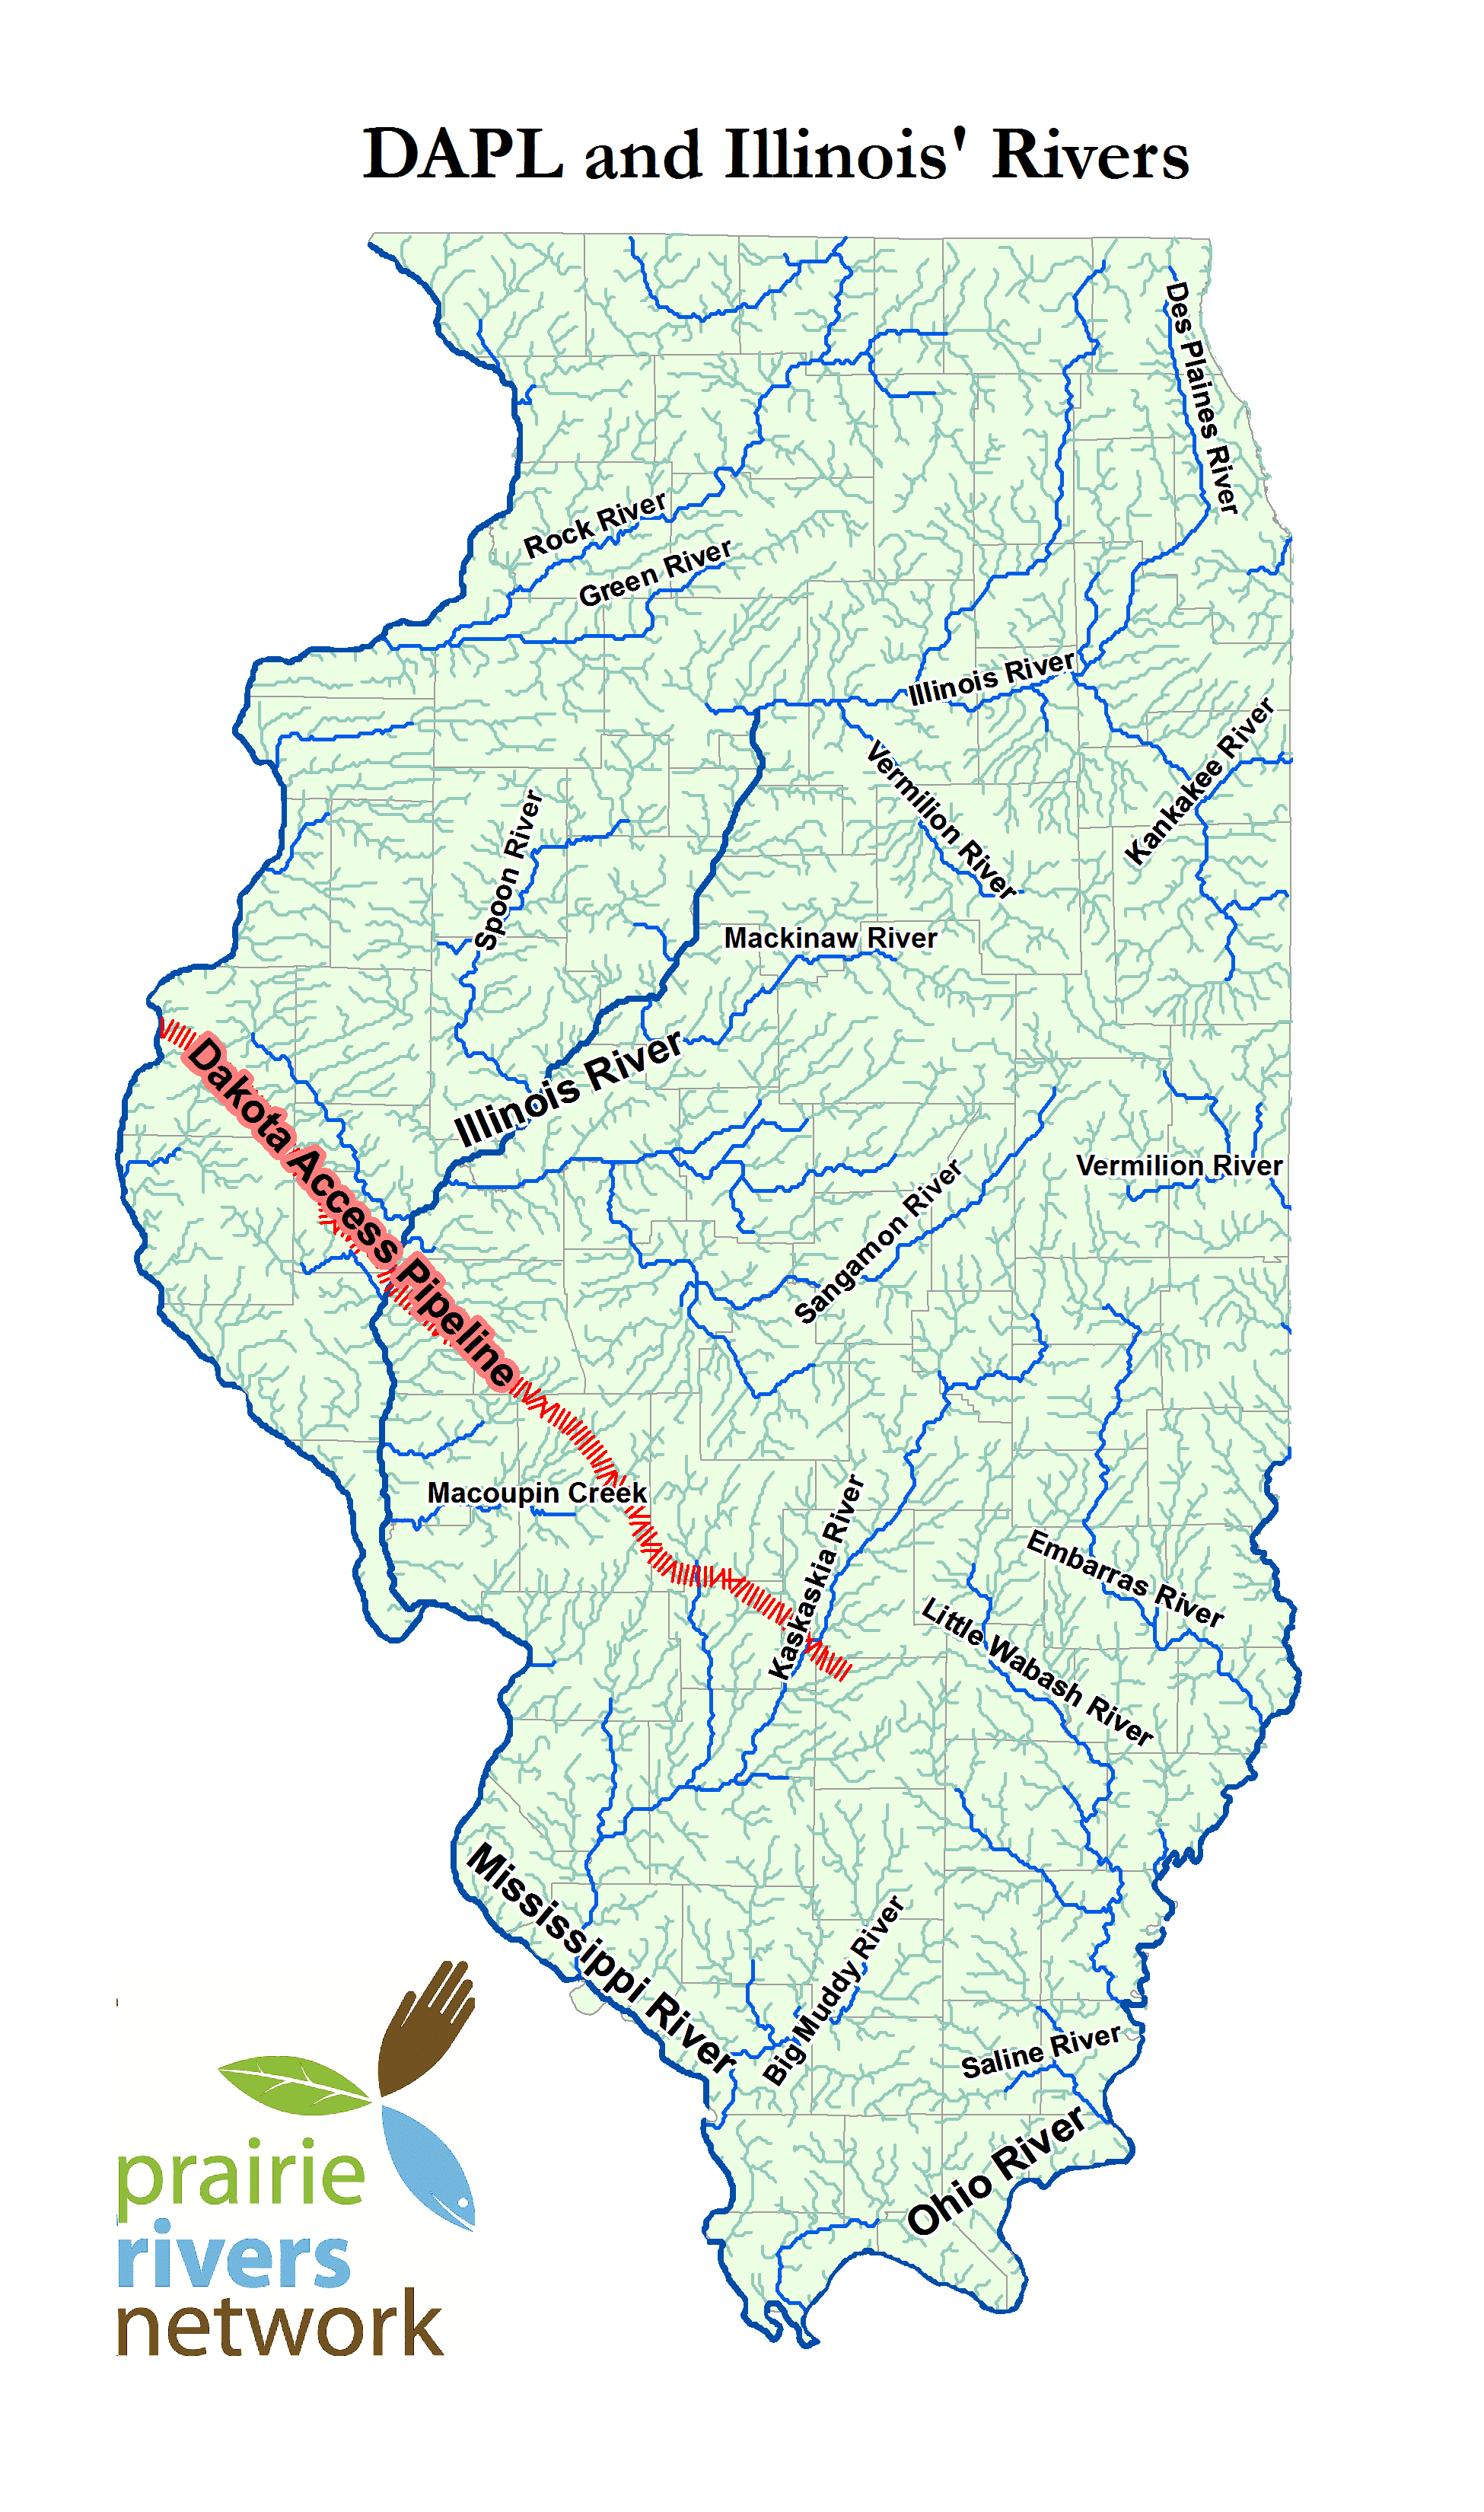 DAPL and Illinois' Rivers